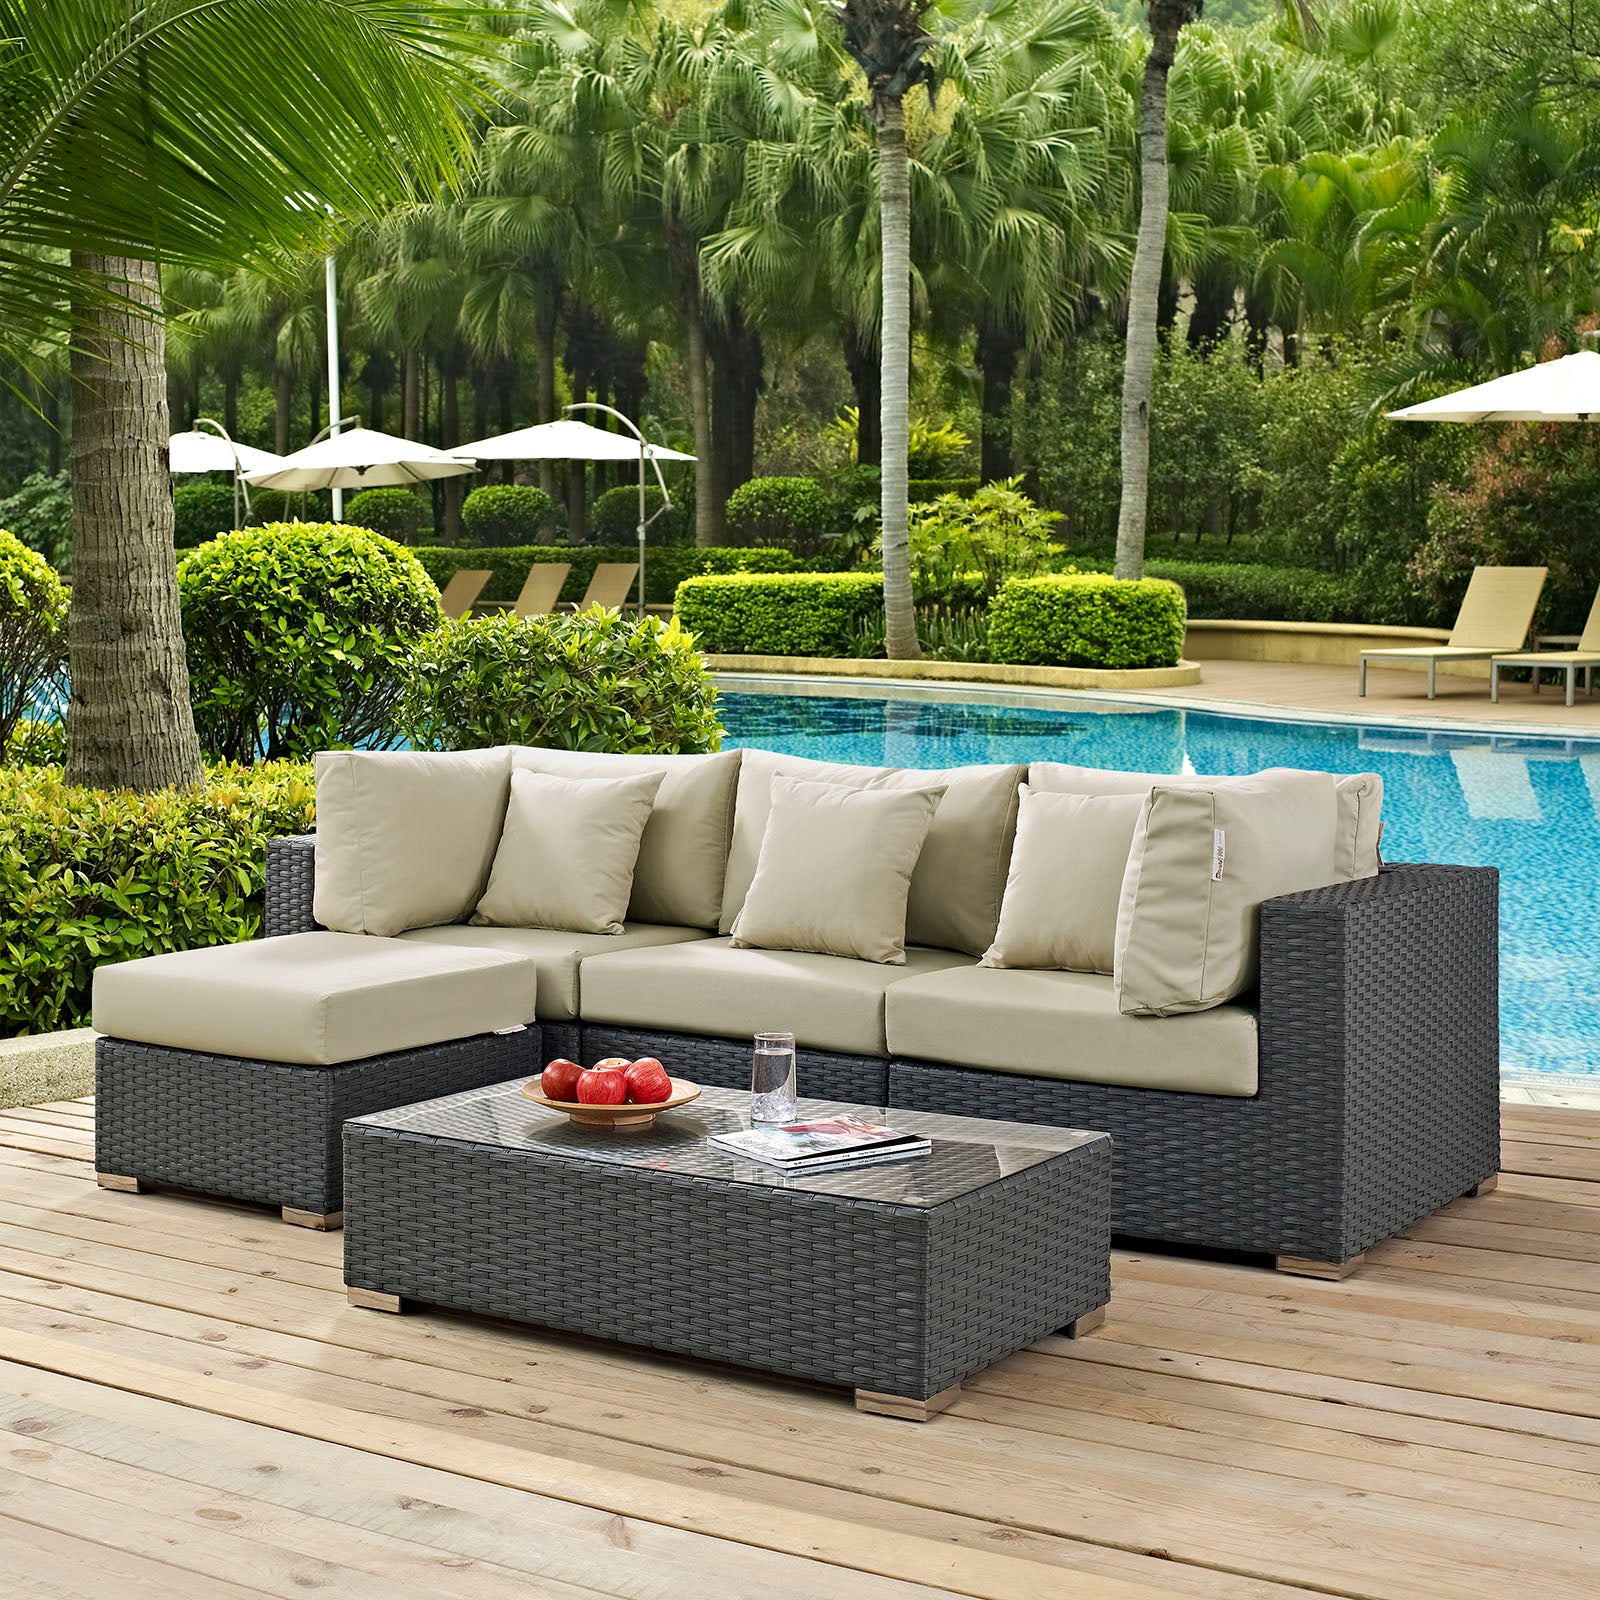 Modway Outdoor Conversation Sets - Sojourn 5 Piece Outdoor Patio Sectional Set Antique Beige